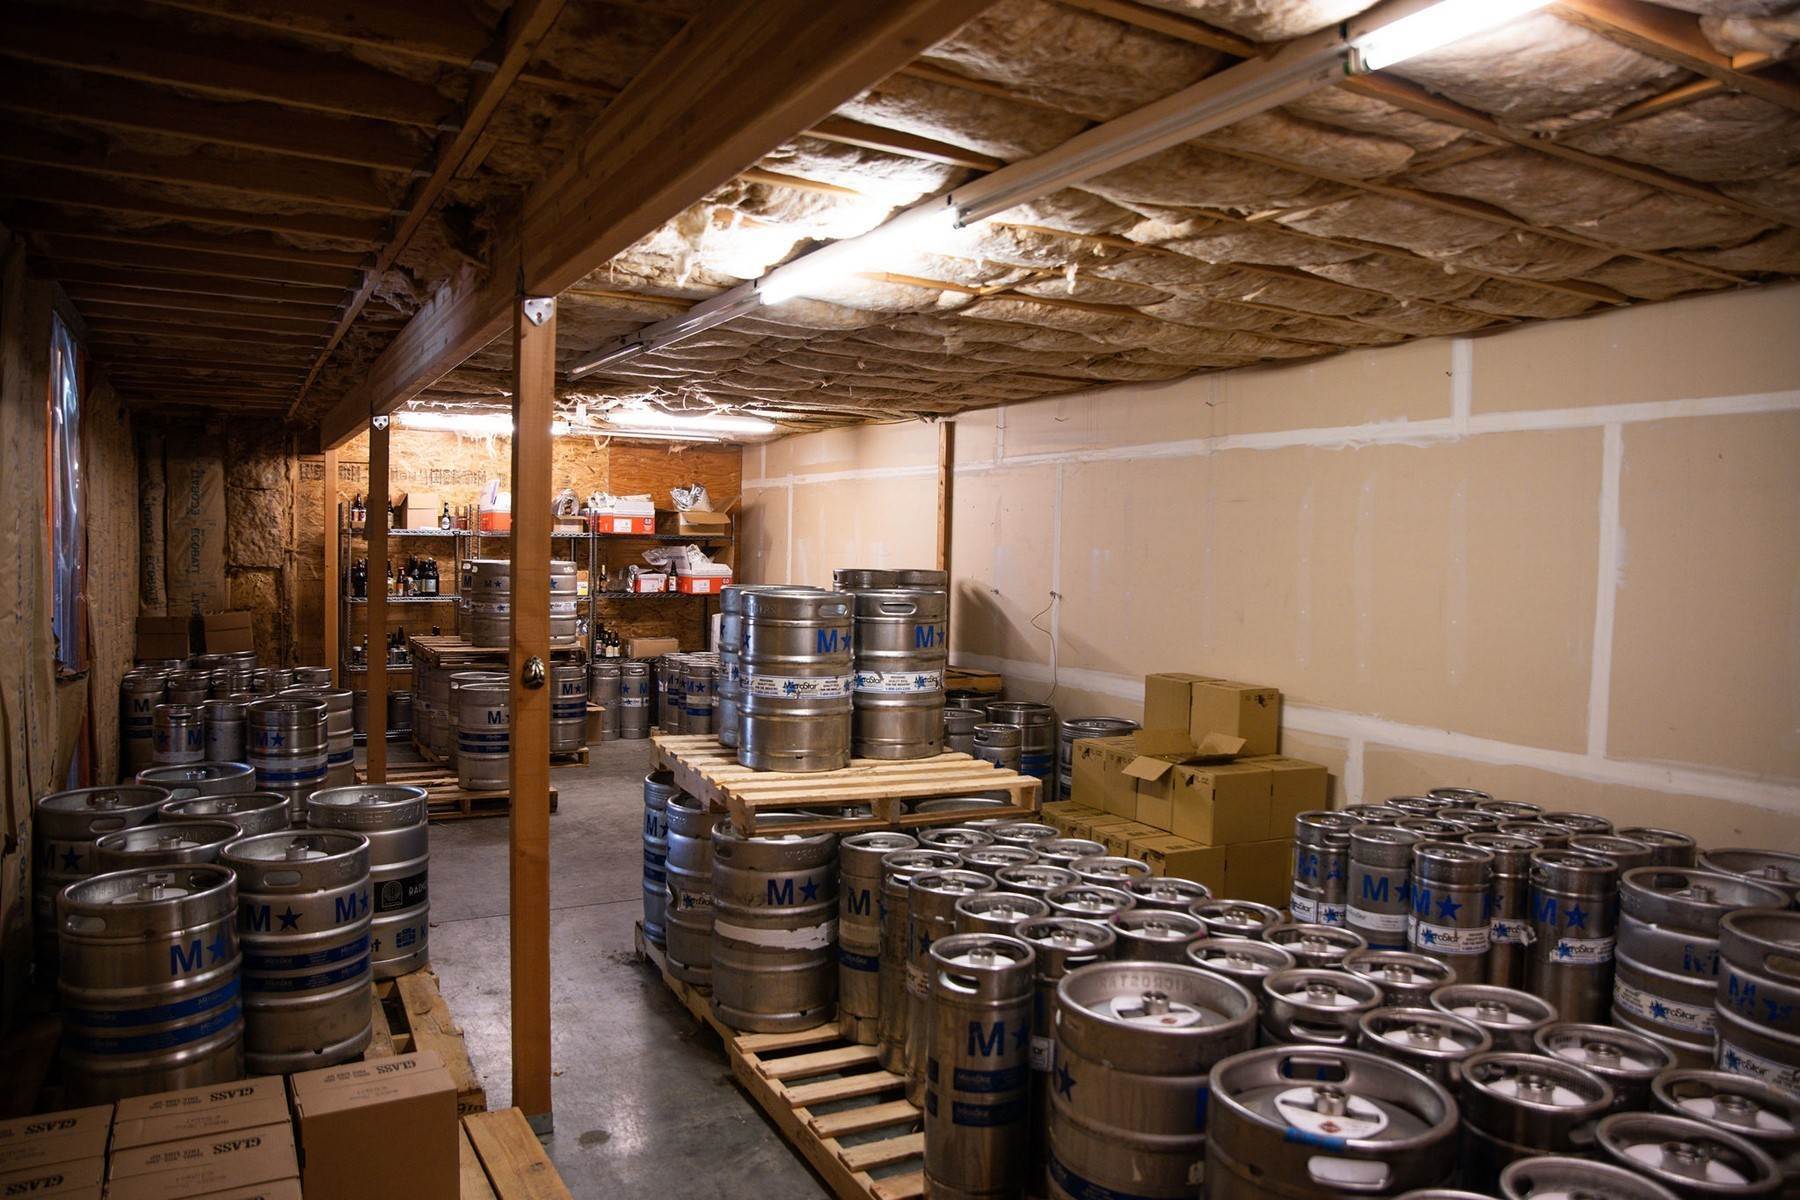 19. Property for Sale at 6180 E Seltice Way Suite 102 - Commercial Brewery 6180 E Seltice Way-Commercial Brewery Post Falls, Idaho 83854 United States